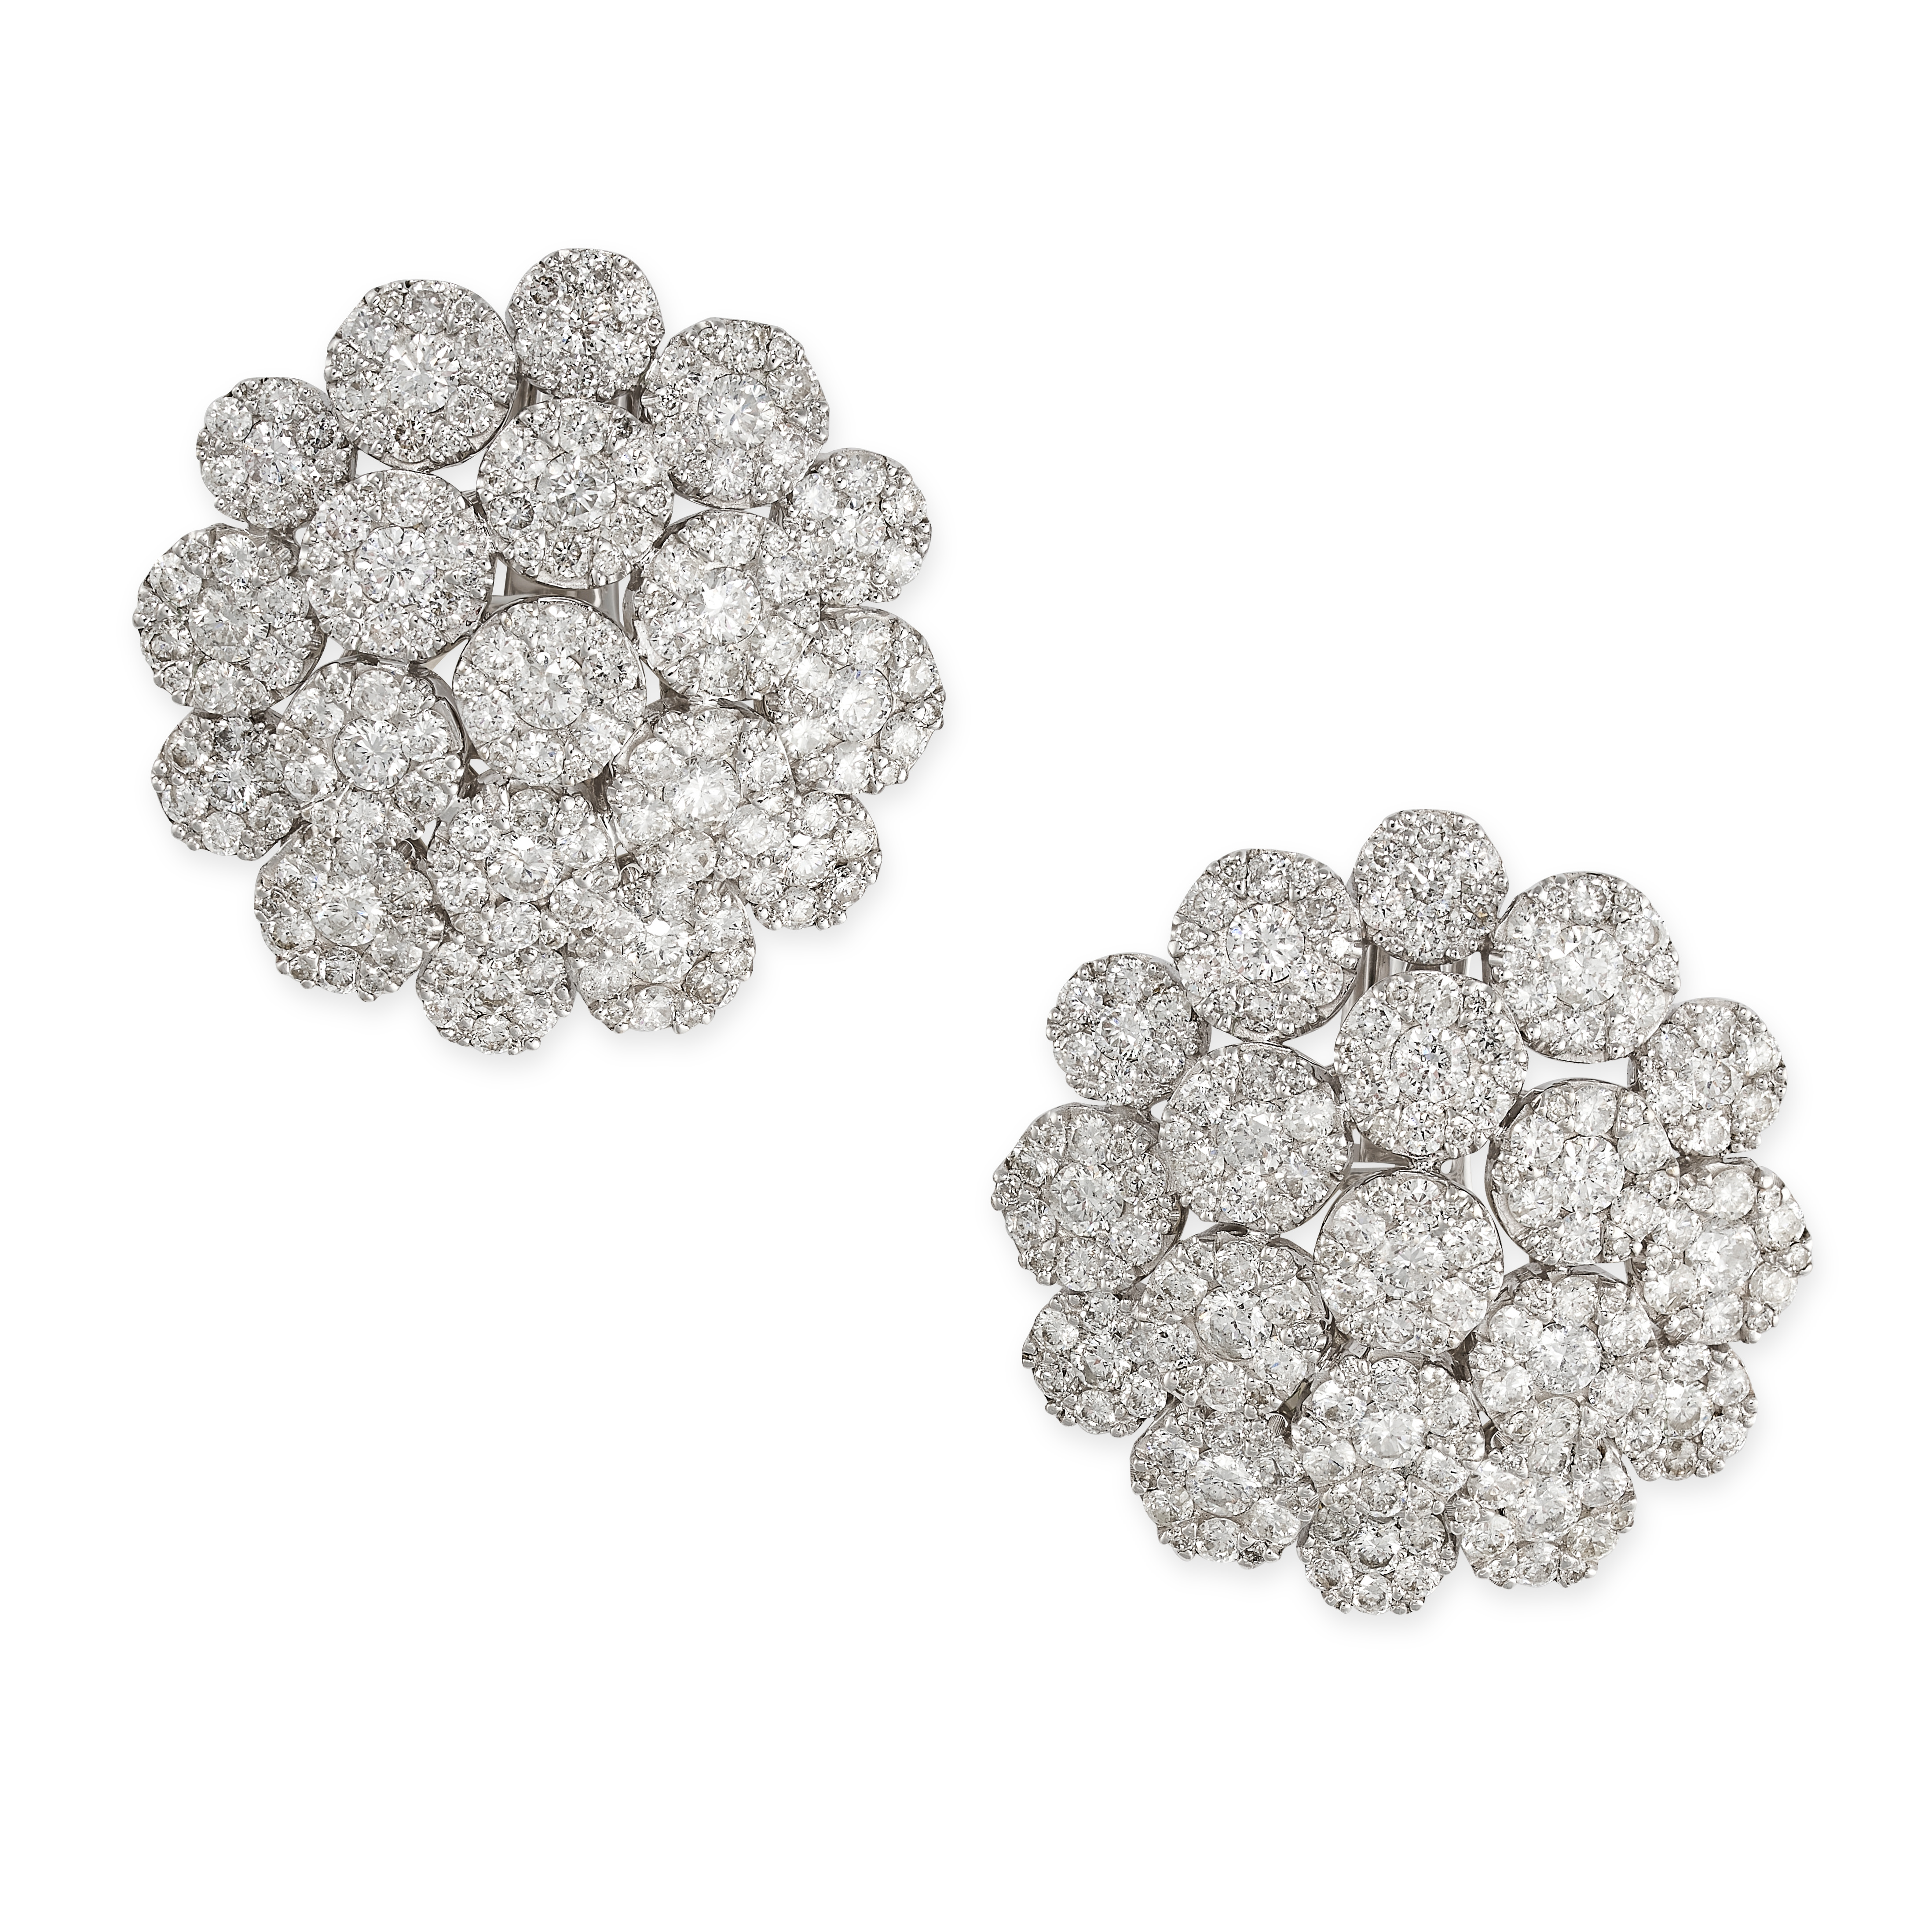 A PAIR OF DIAMOND CLUSTER EARRINGS  Floral design, post fittings with clip backs  Brilliant-cut